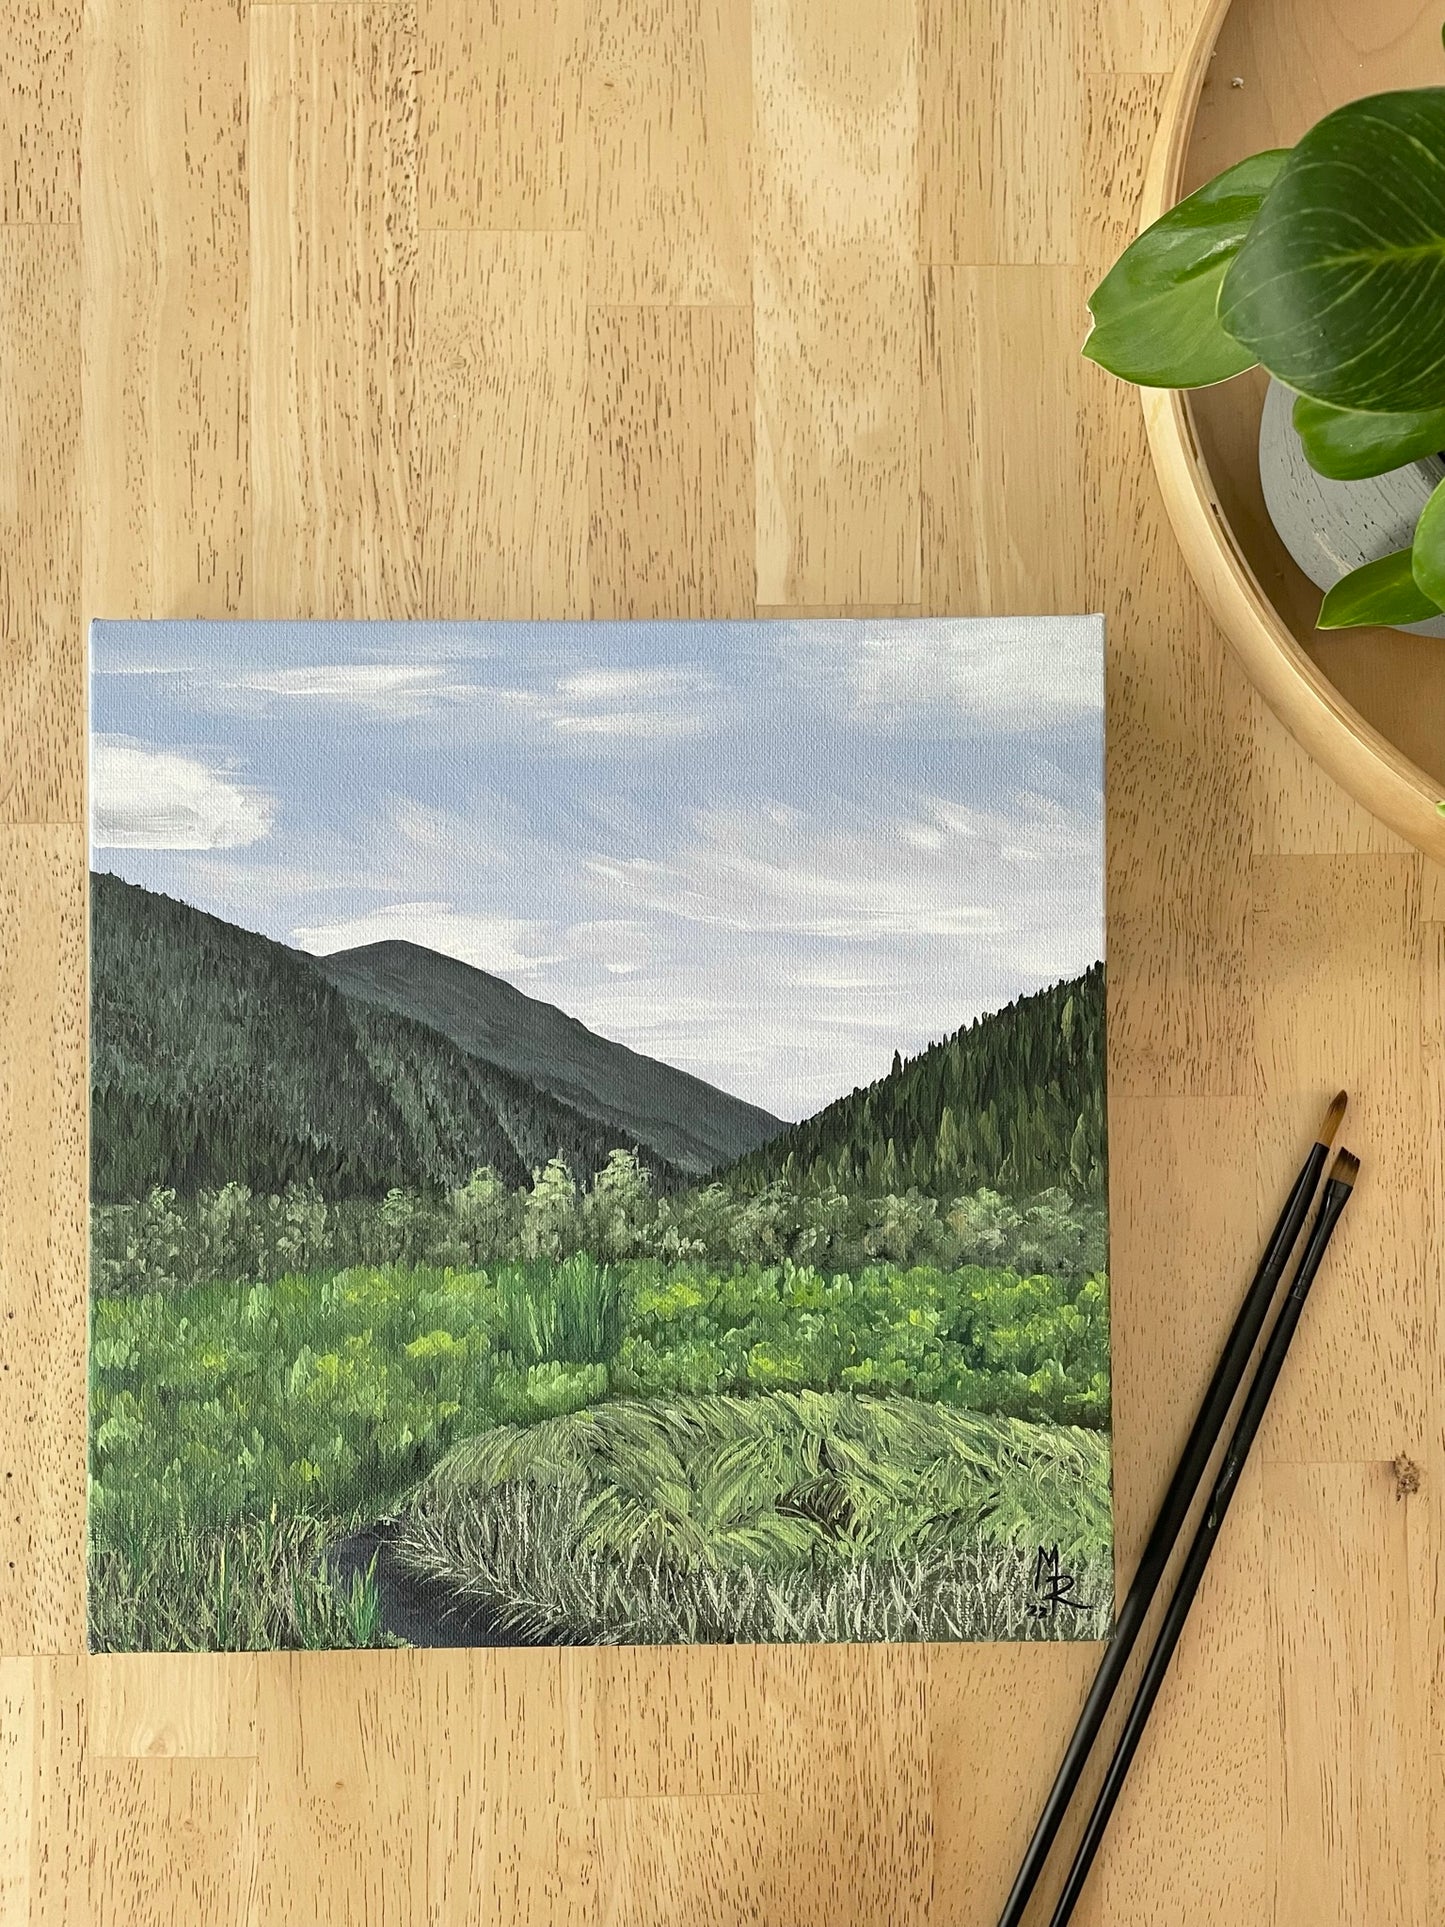 "Mountain Valley" acrylic painting on canvas